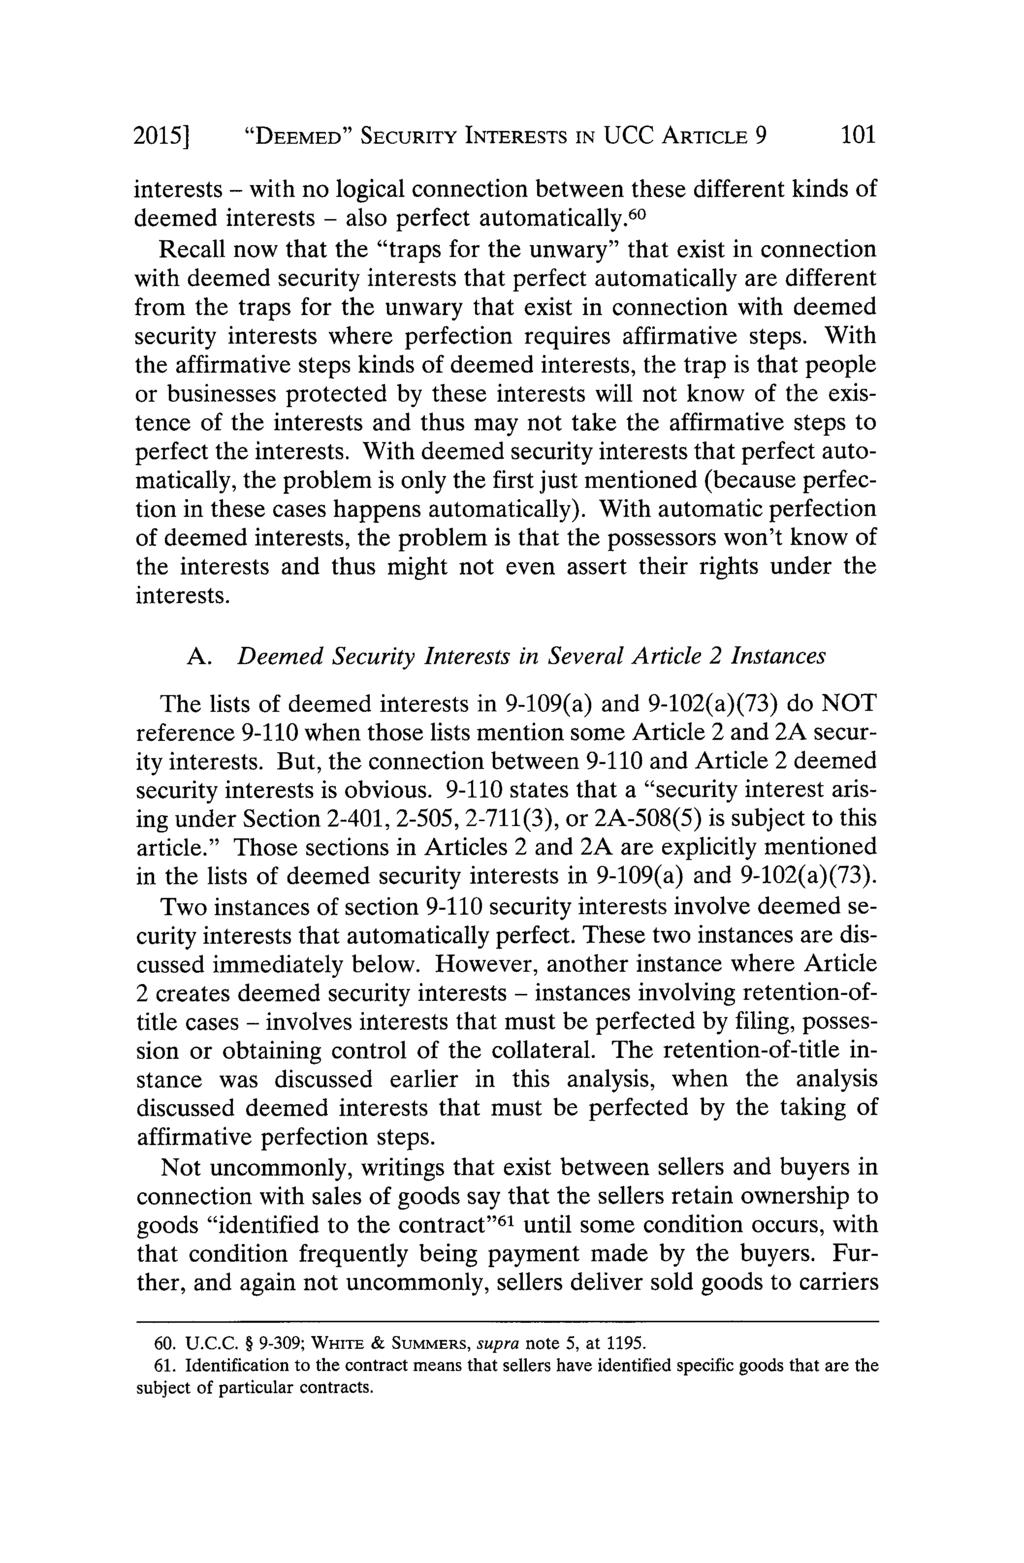 2015] "DEEMED" SECURITY INTERESTS IN UCC ARTICLE 9 101 interests - with no logical connection between these different kinds of deemed interests - also perfect automatically.